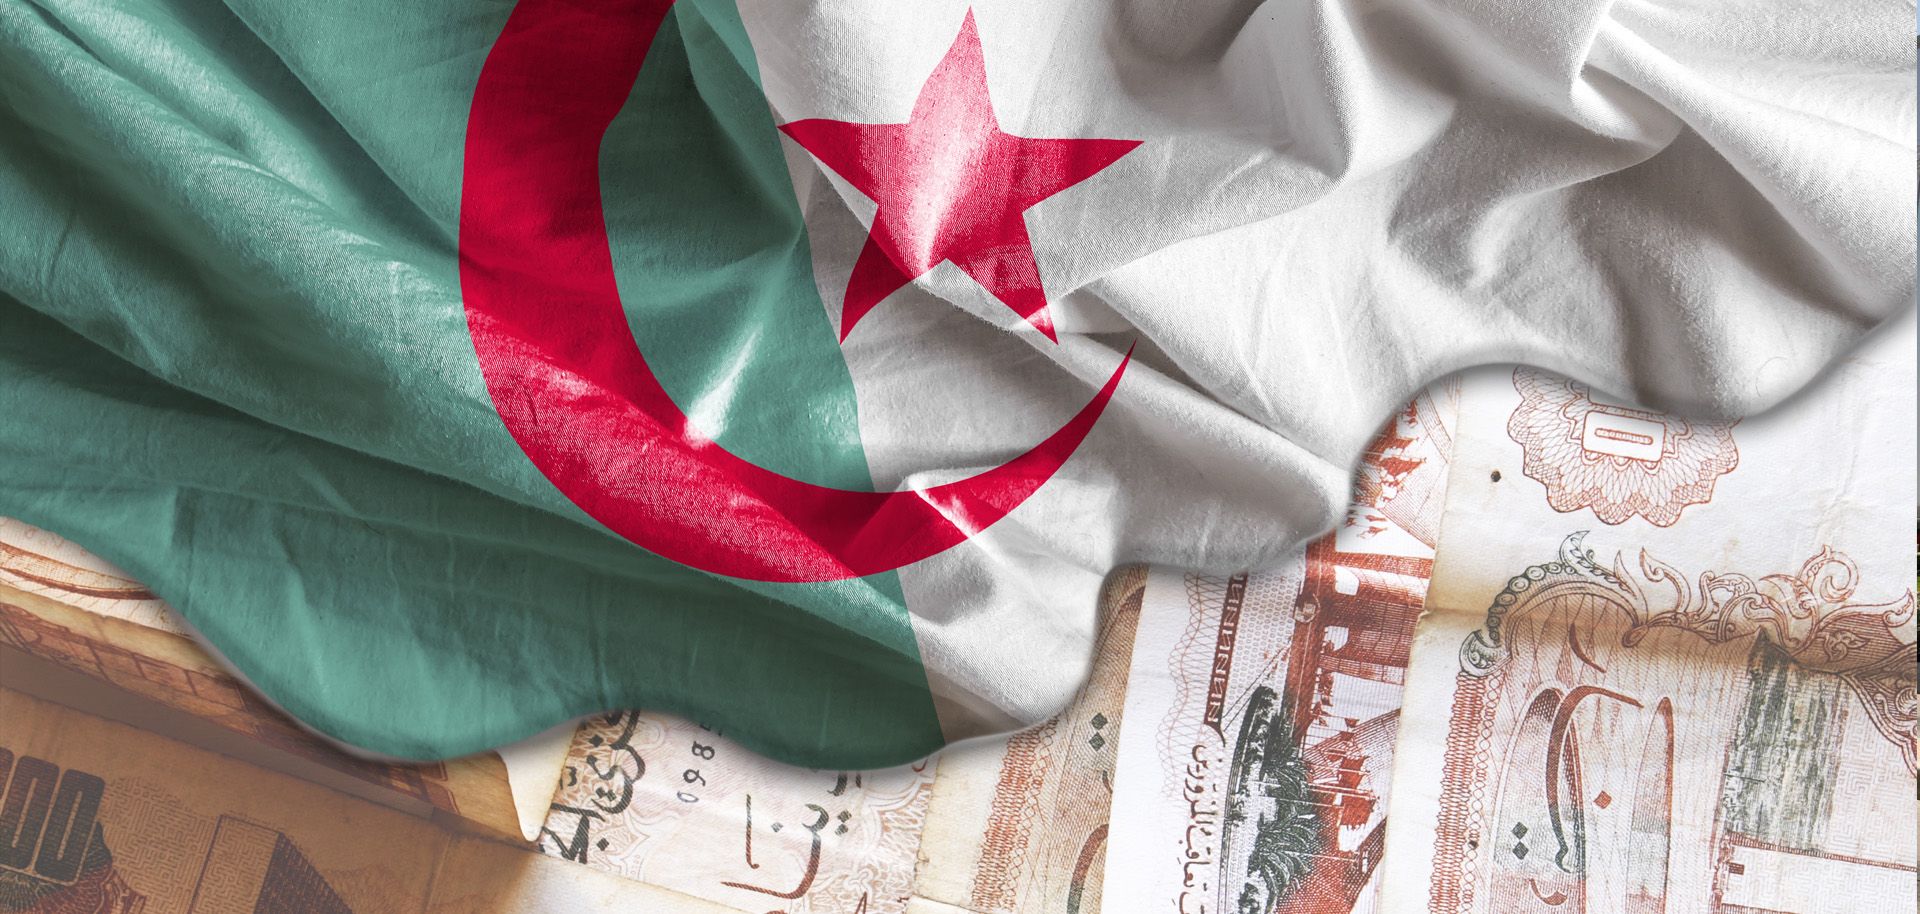 Since the Arab Spring, Algeria has a stable player in an unstable region.